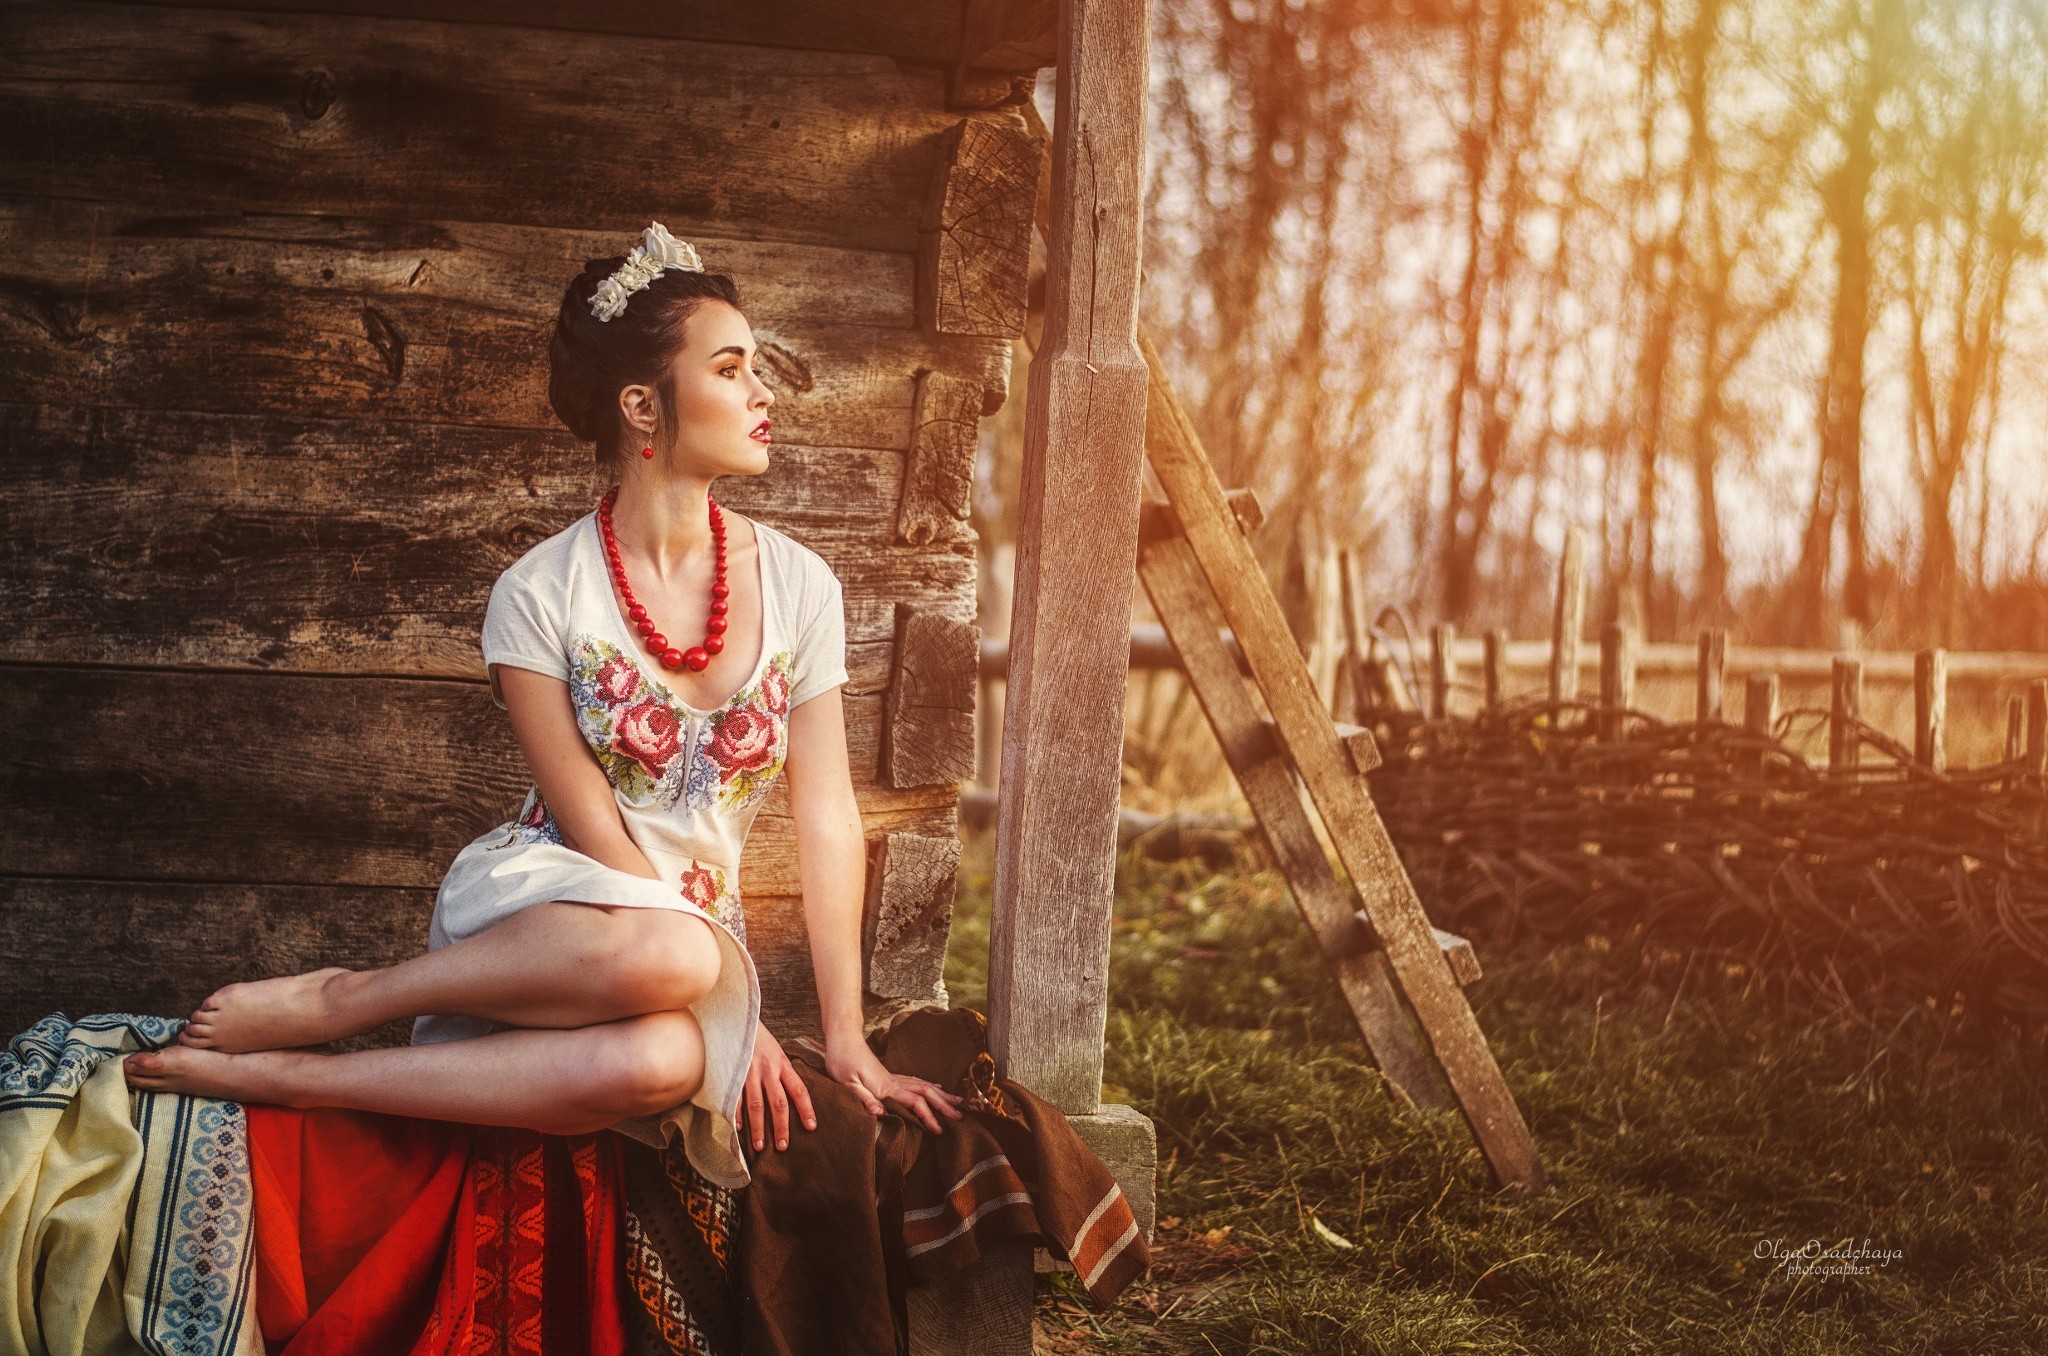 People 2048x1356 women model brunette red lipstick sunset dress legs together women outdoors looking into the distance 500px necklace legs barefoot sunlight Olga Osadchaya Russia village